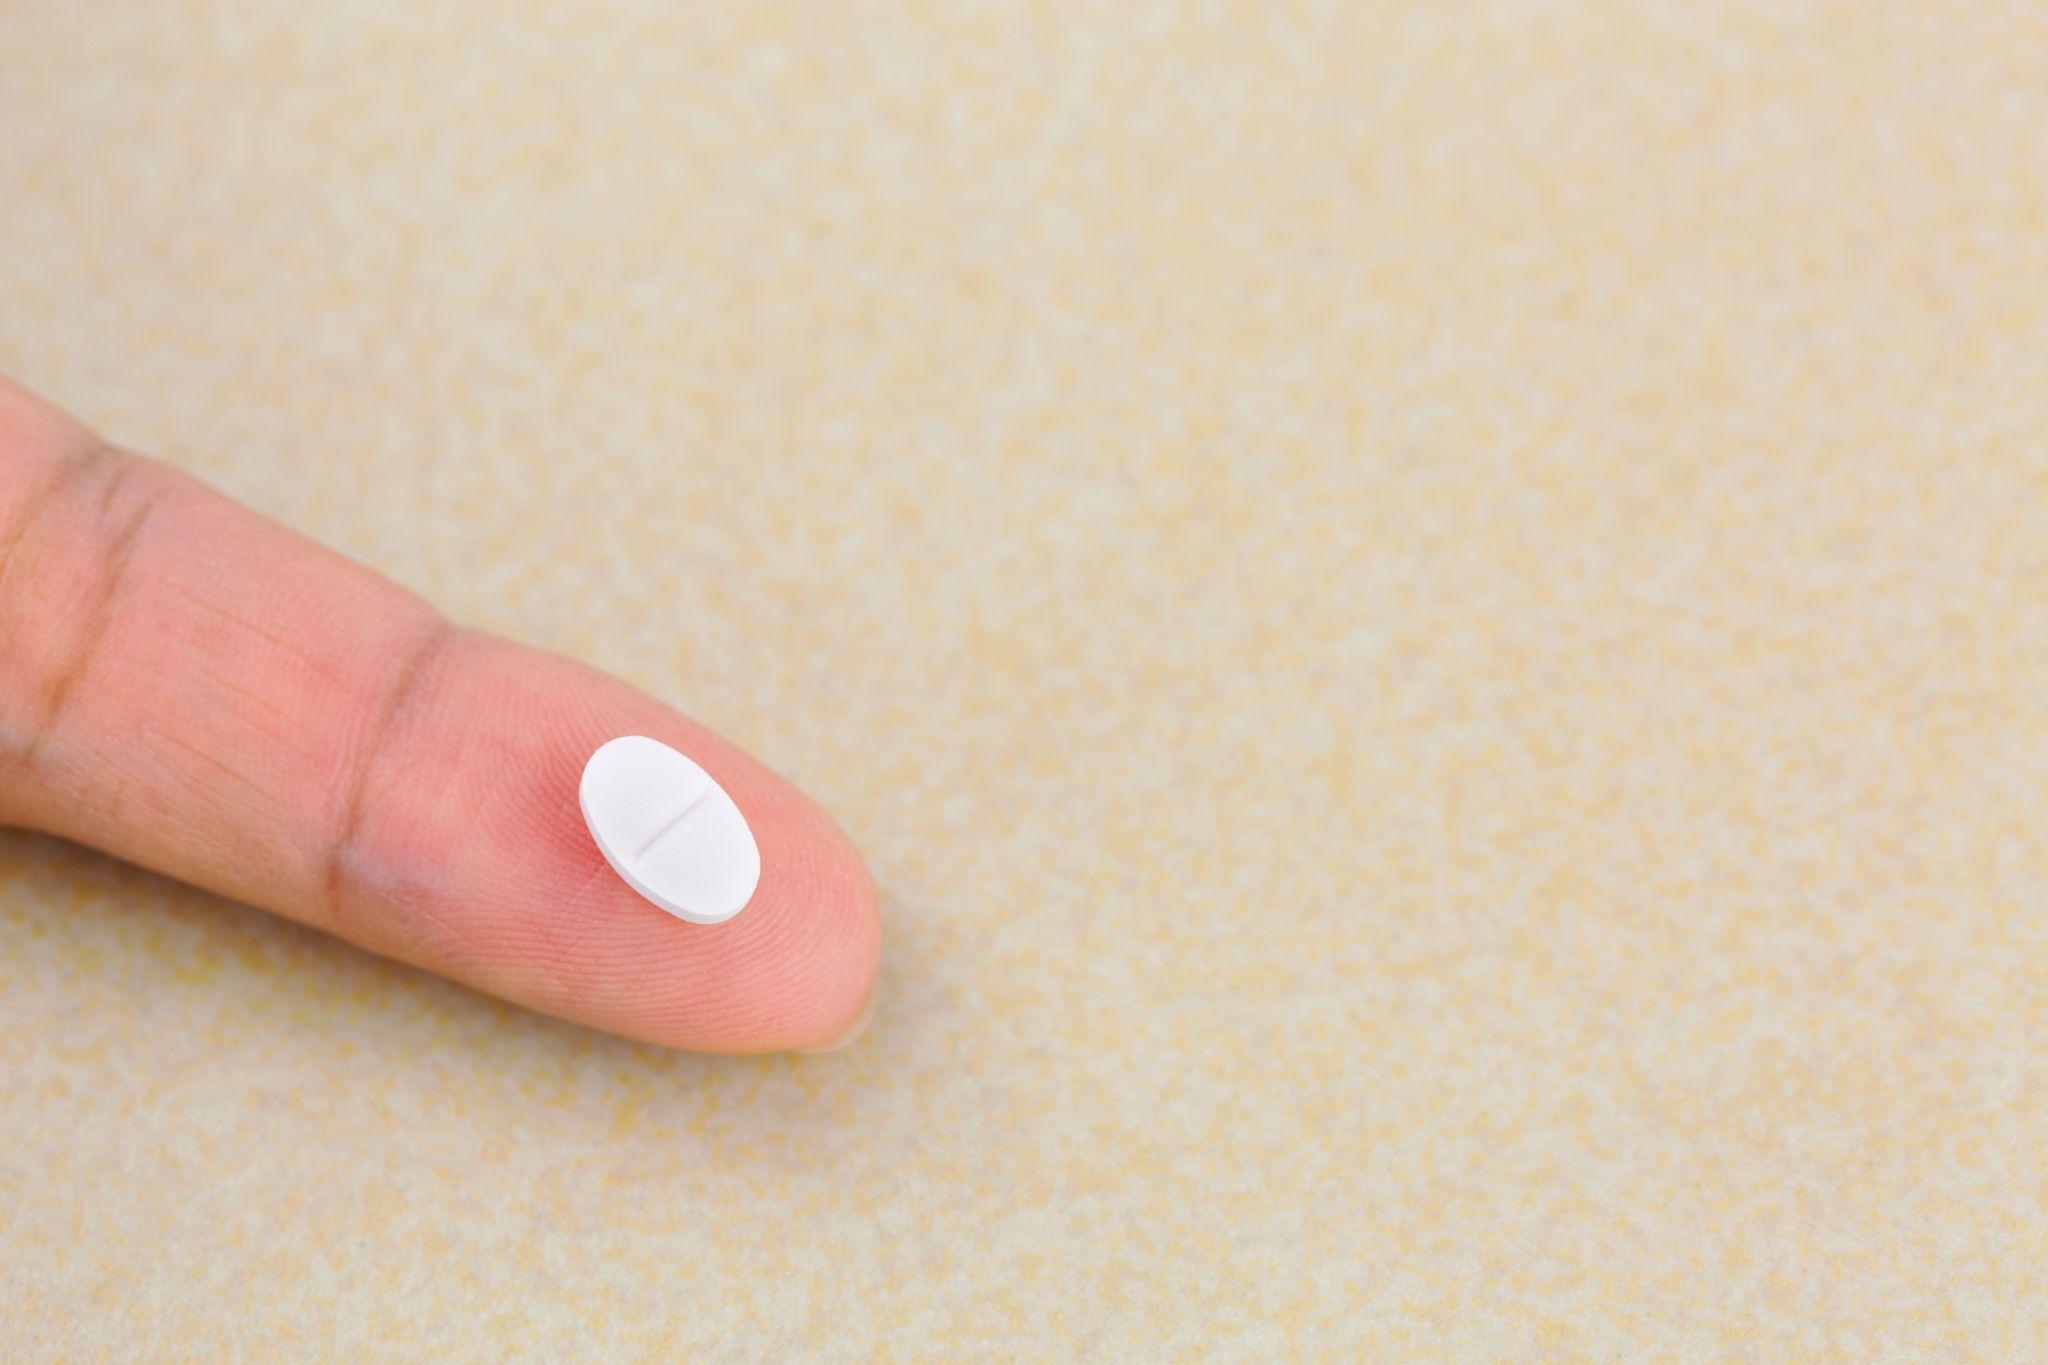 Anti anxiety white pill medicine on finger